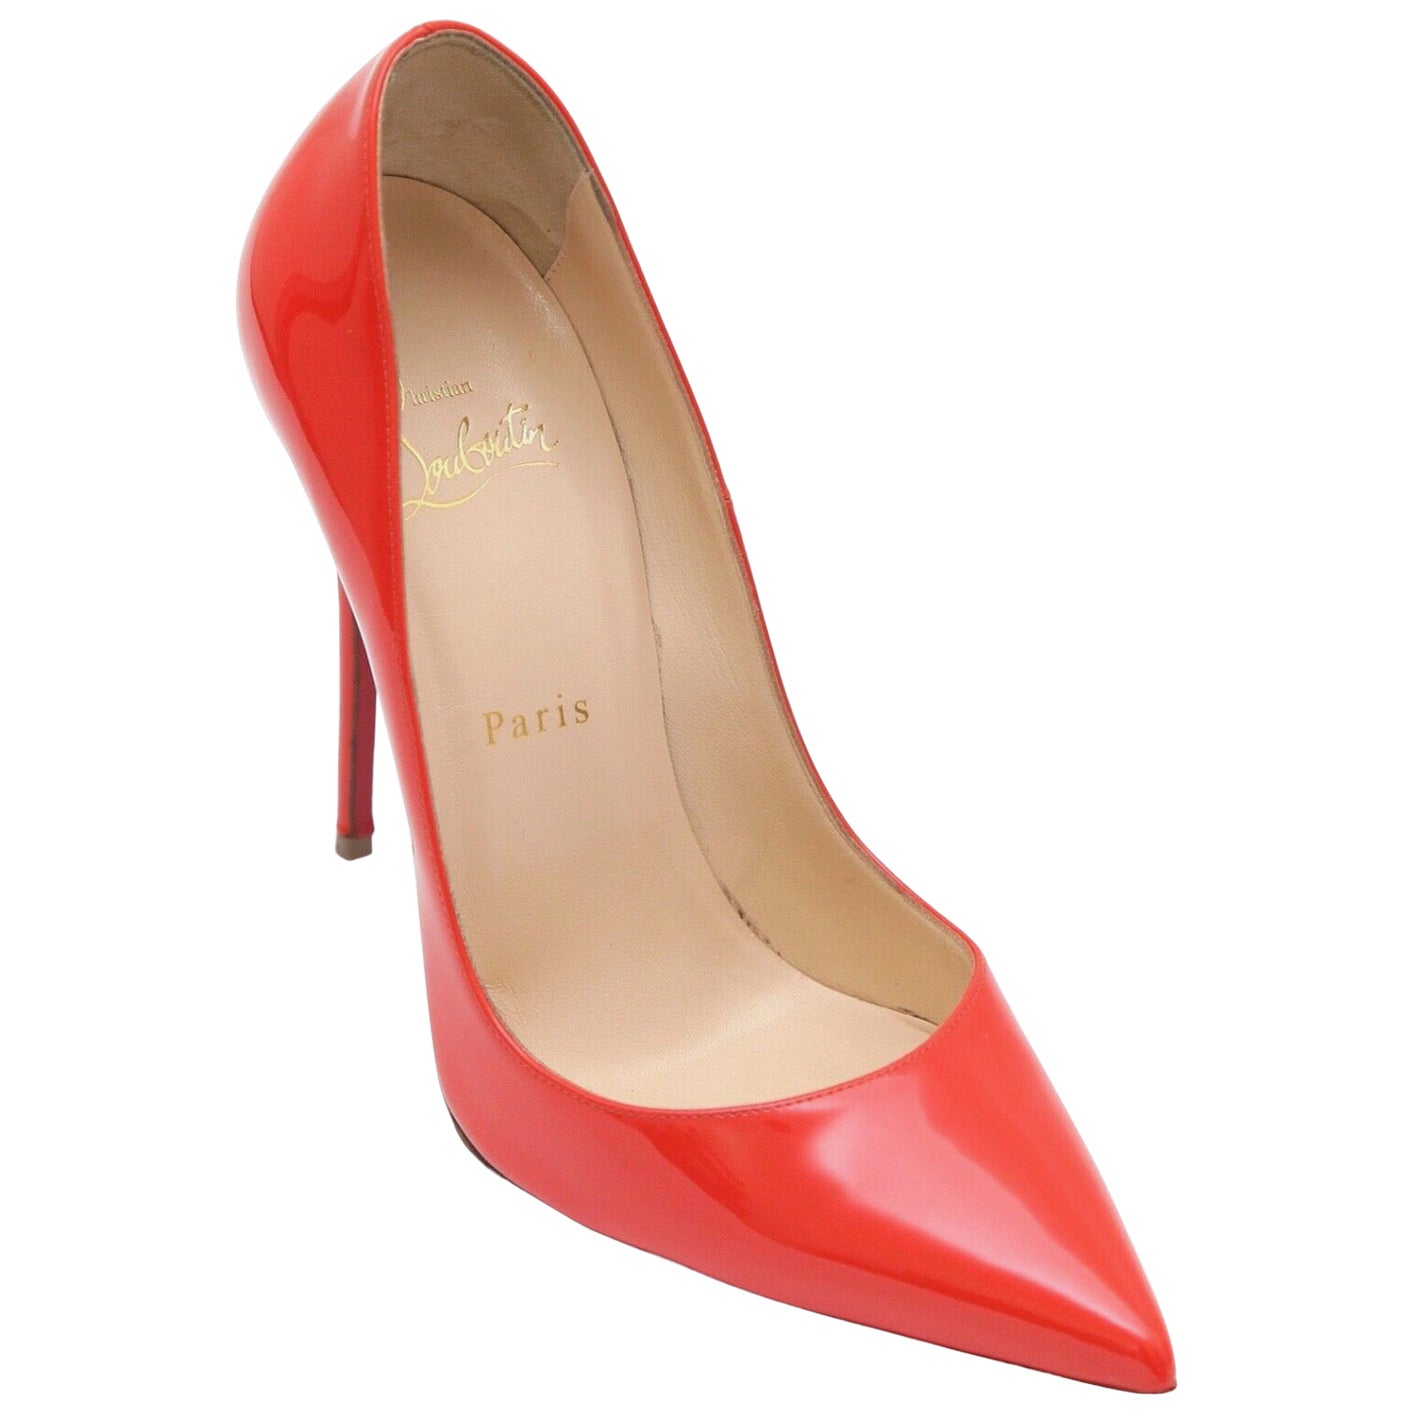 CHRISTIAN LOUBOUTIN Patent Leather Pump ORANGE SO KATE 120 Pointed Toe 38 For Sale